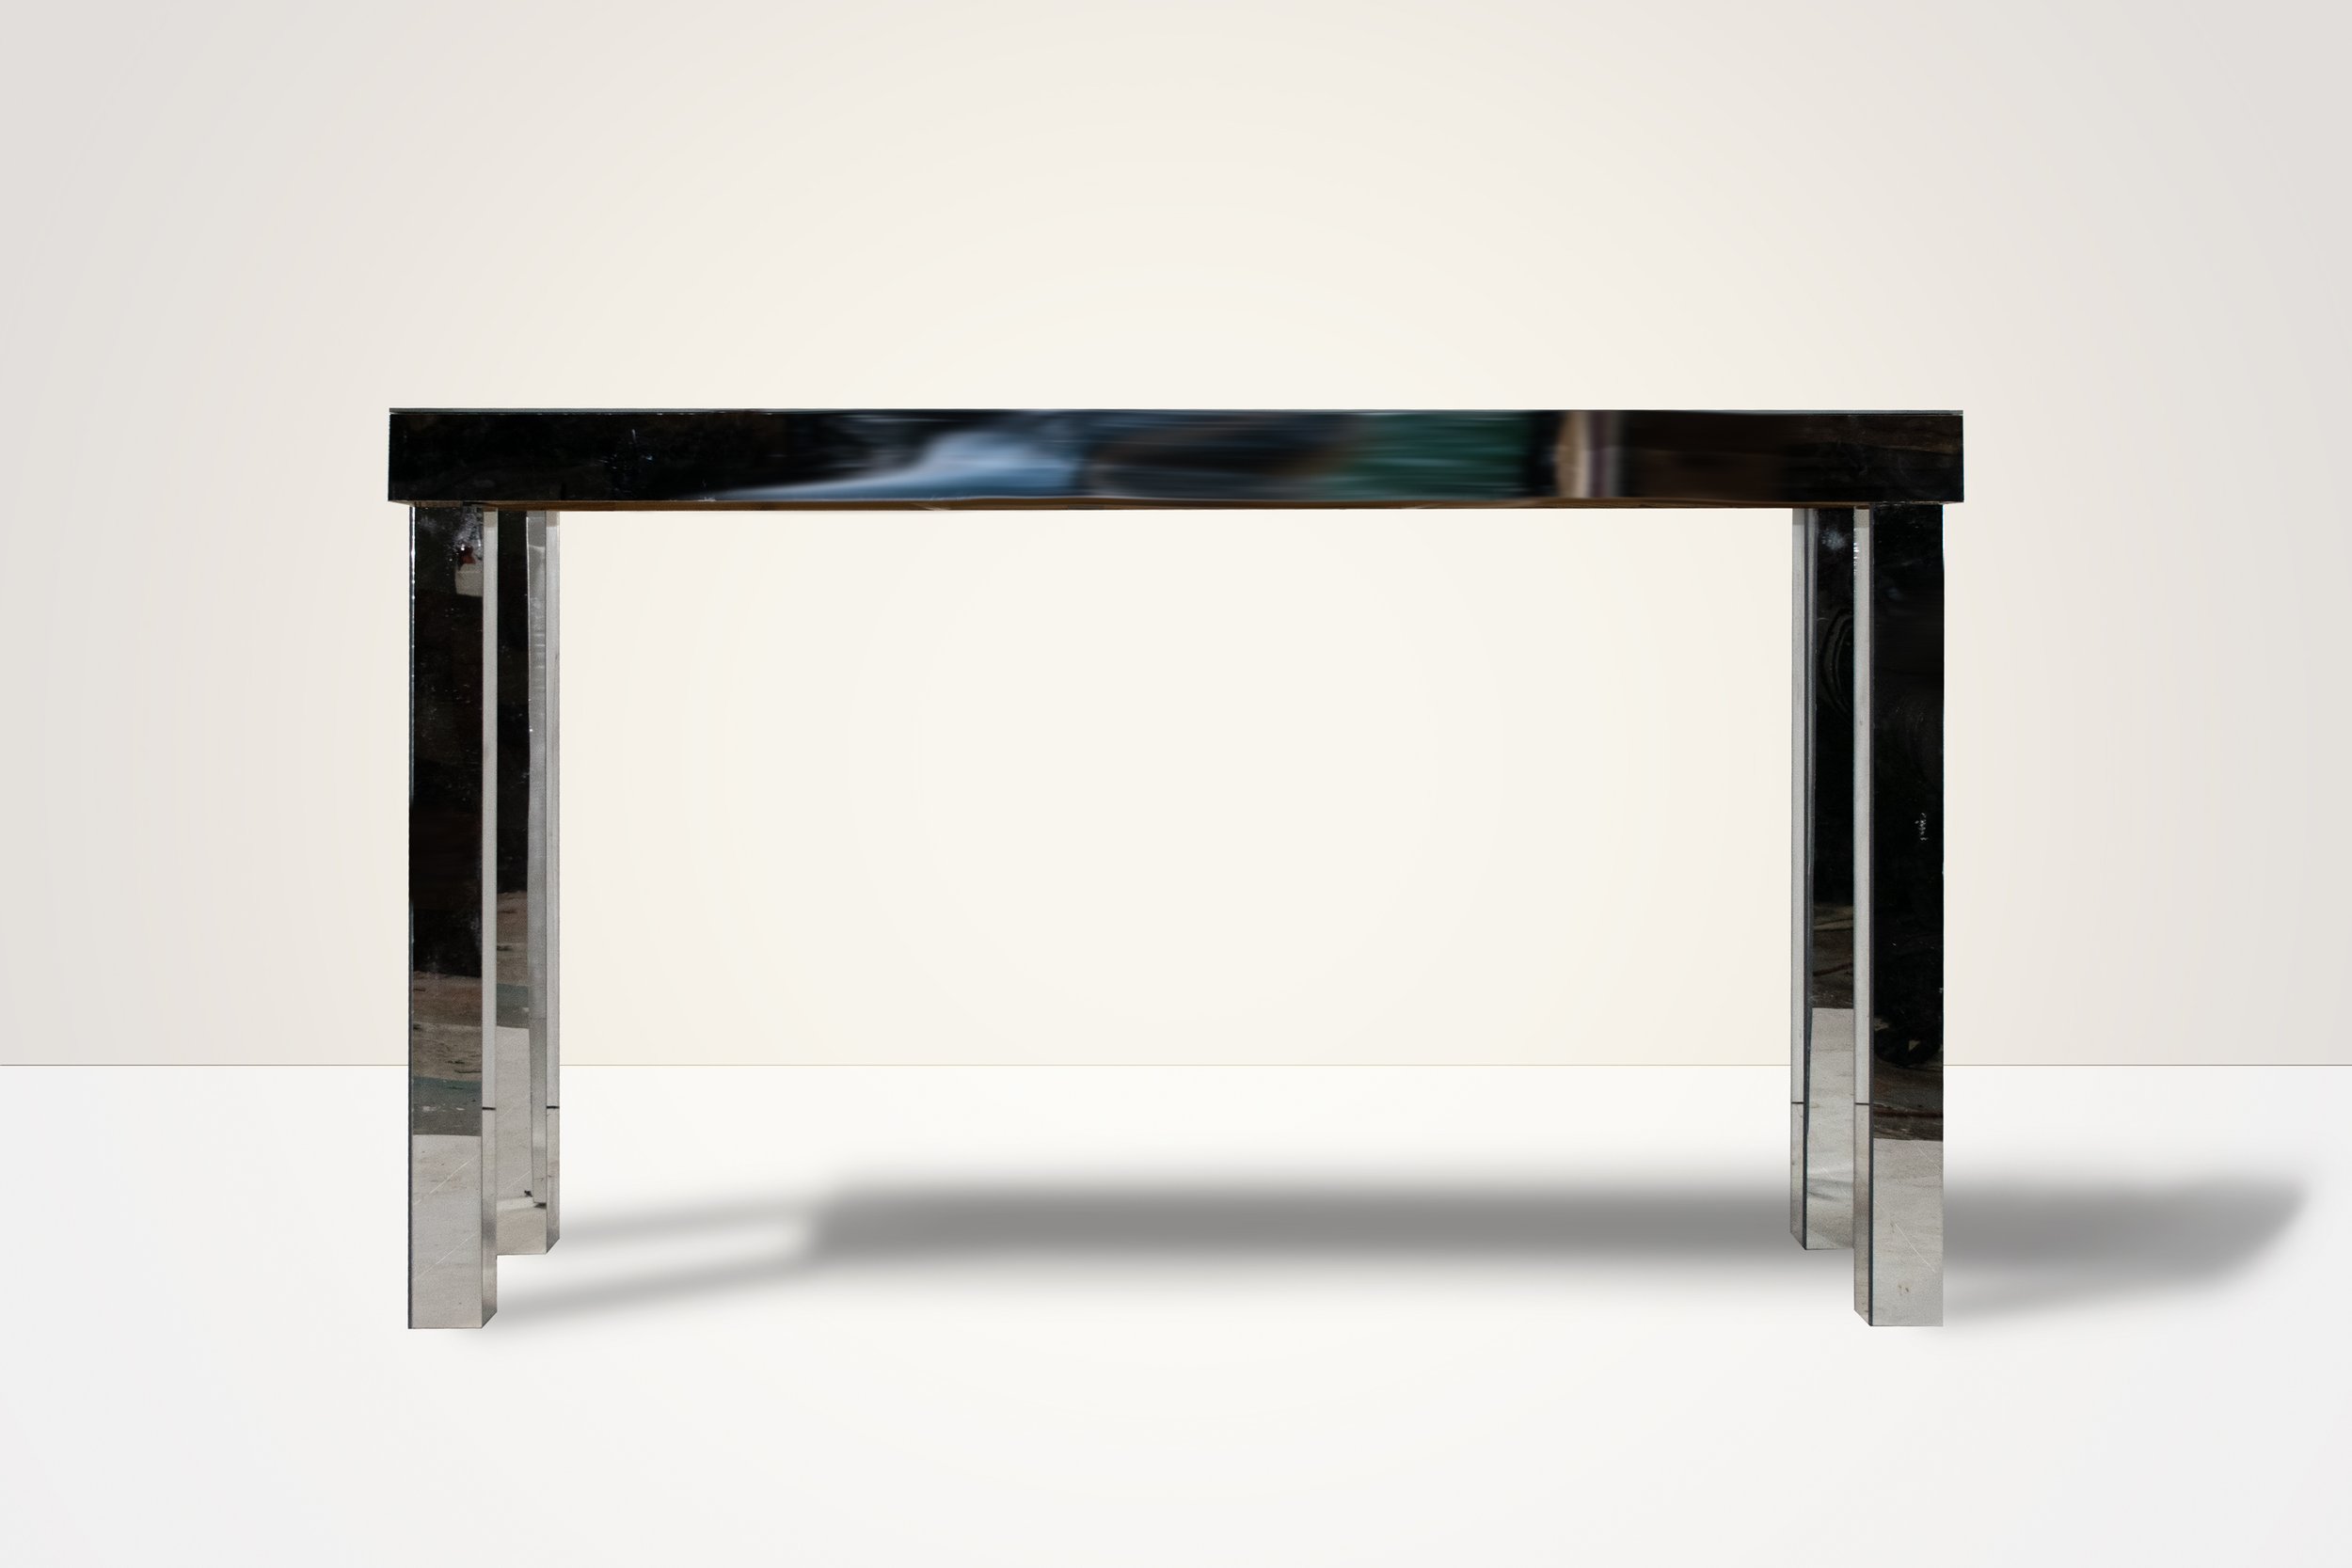 The Mirrored Communal Table